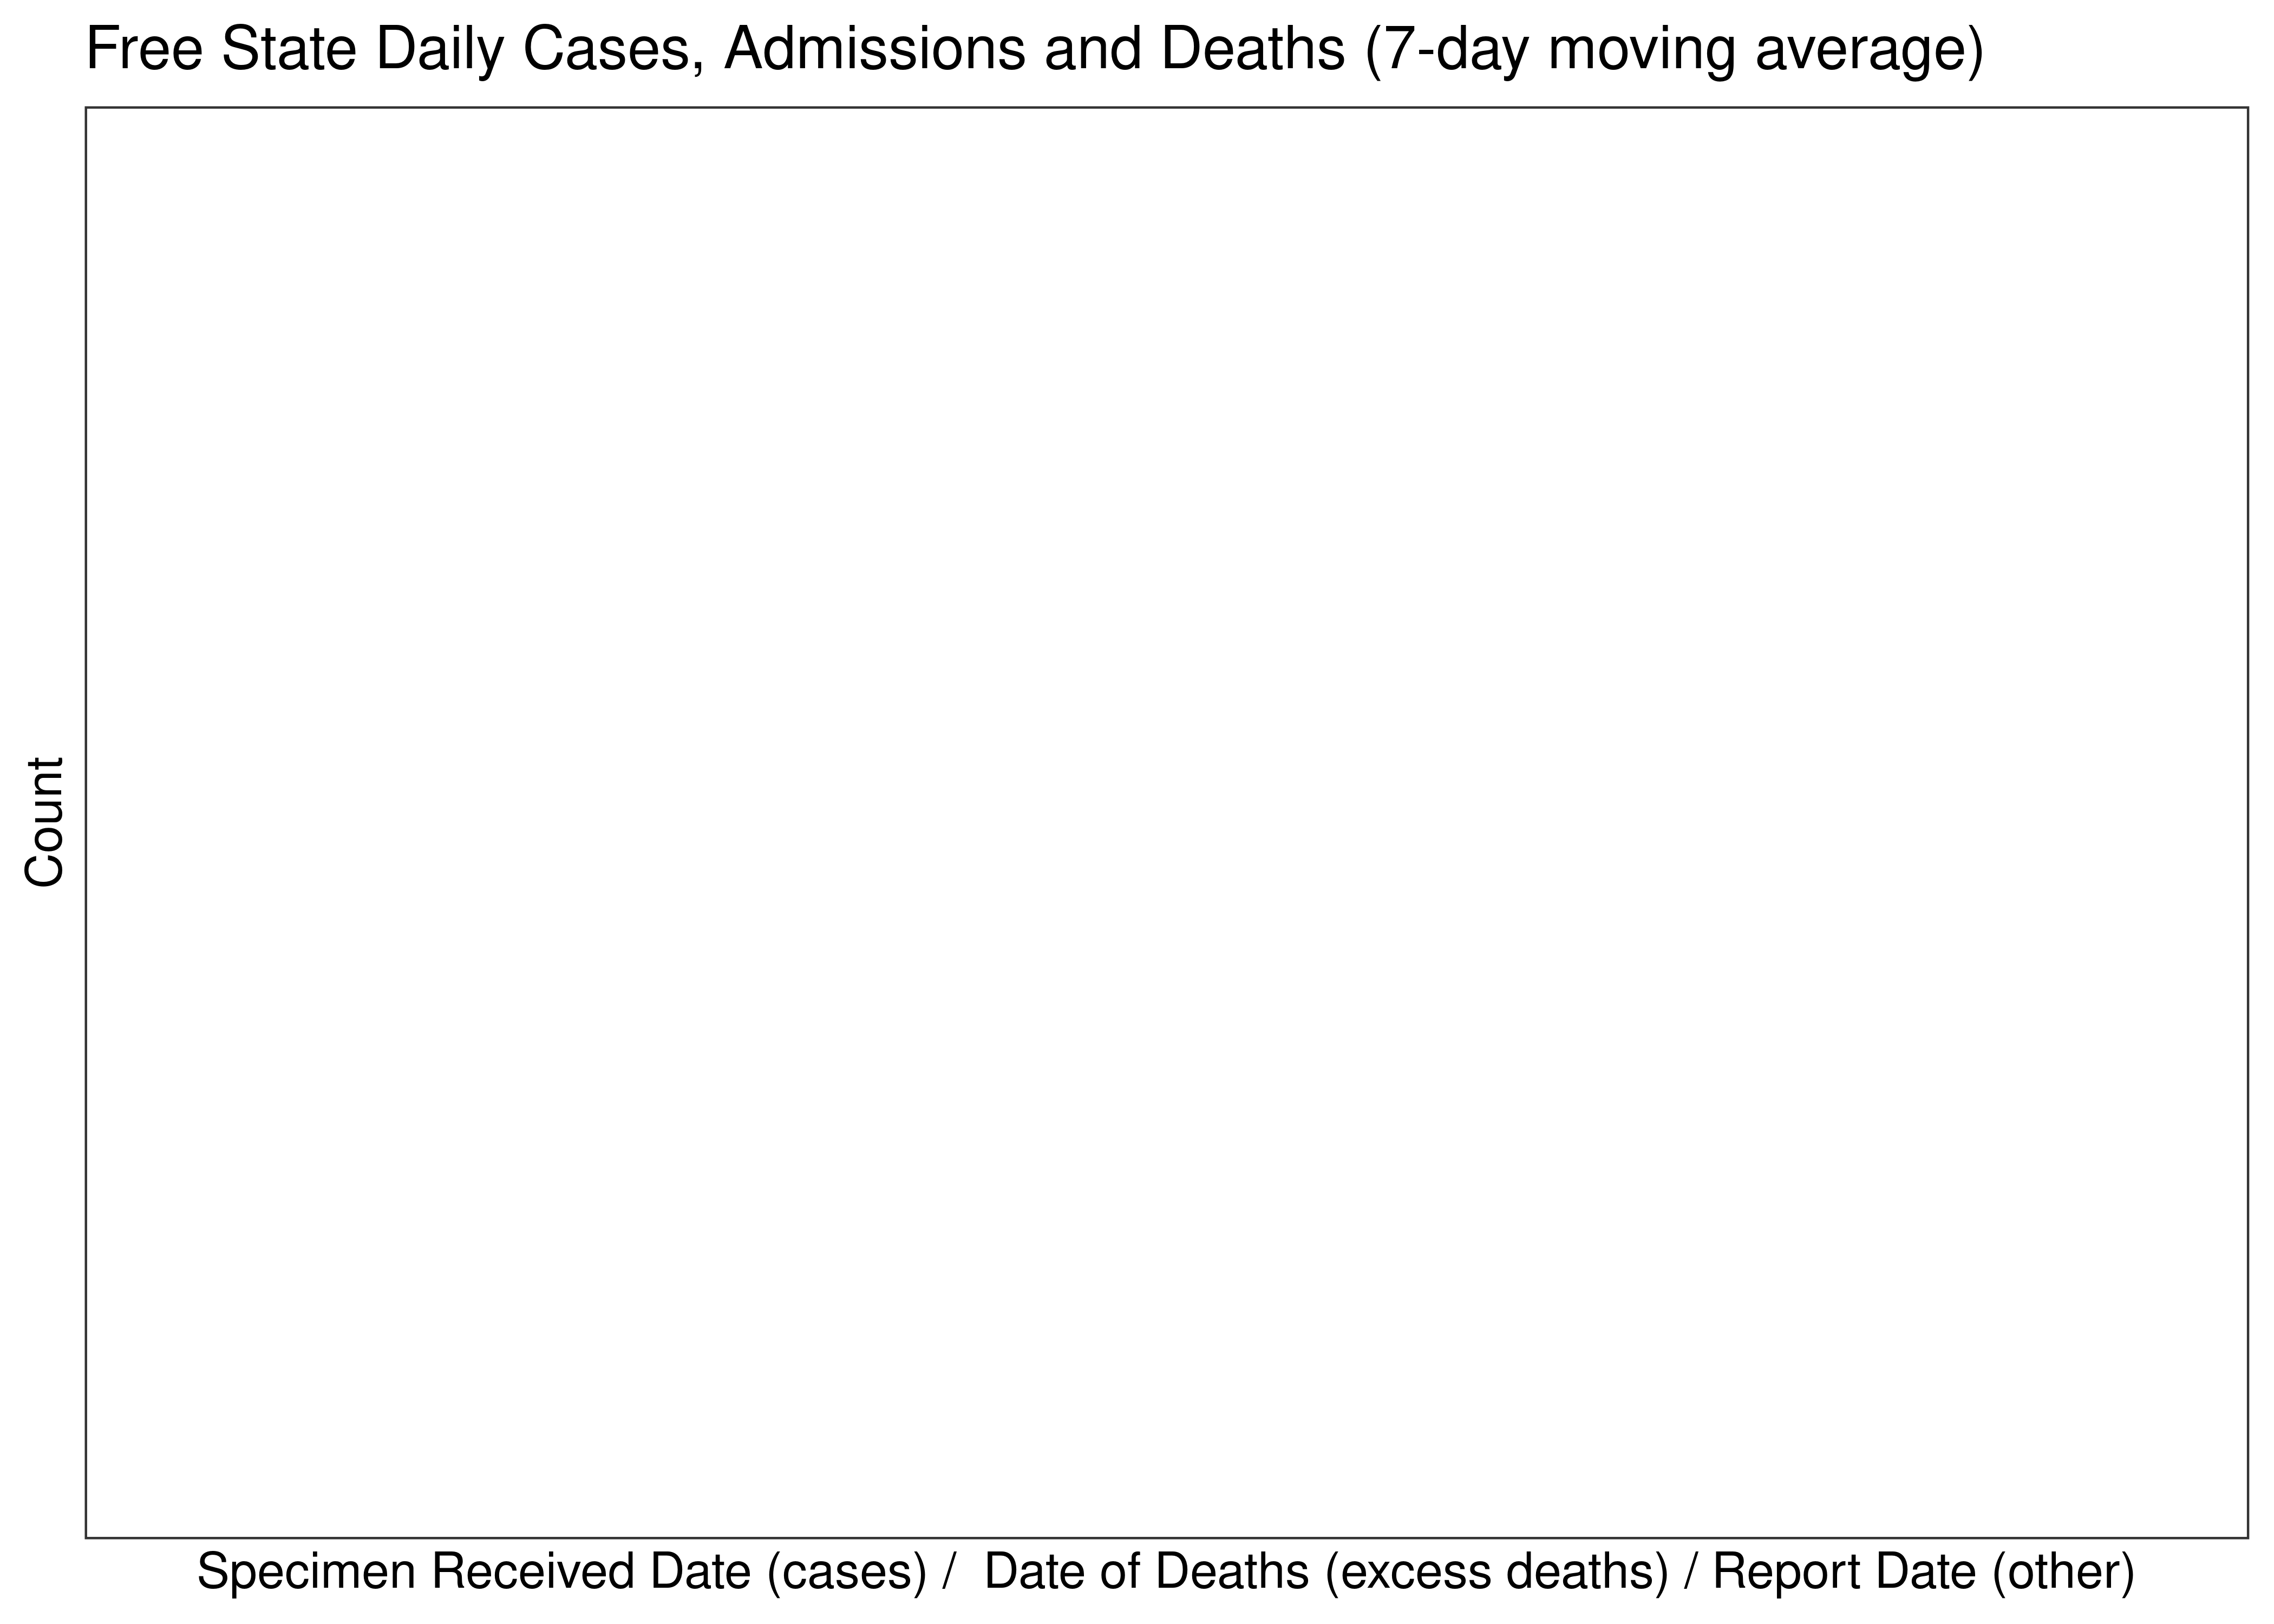 Free State Daily Cases, Admissions and Deaths for Last 30-days (7-day moving average)